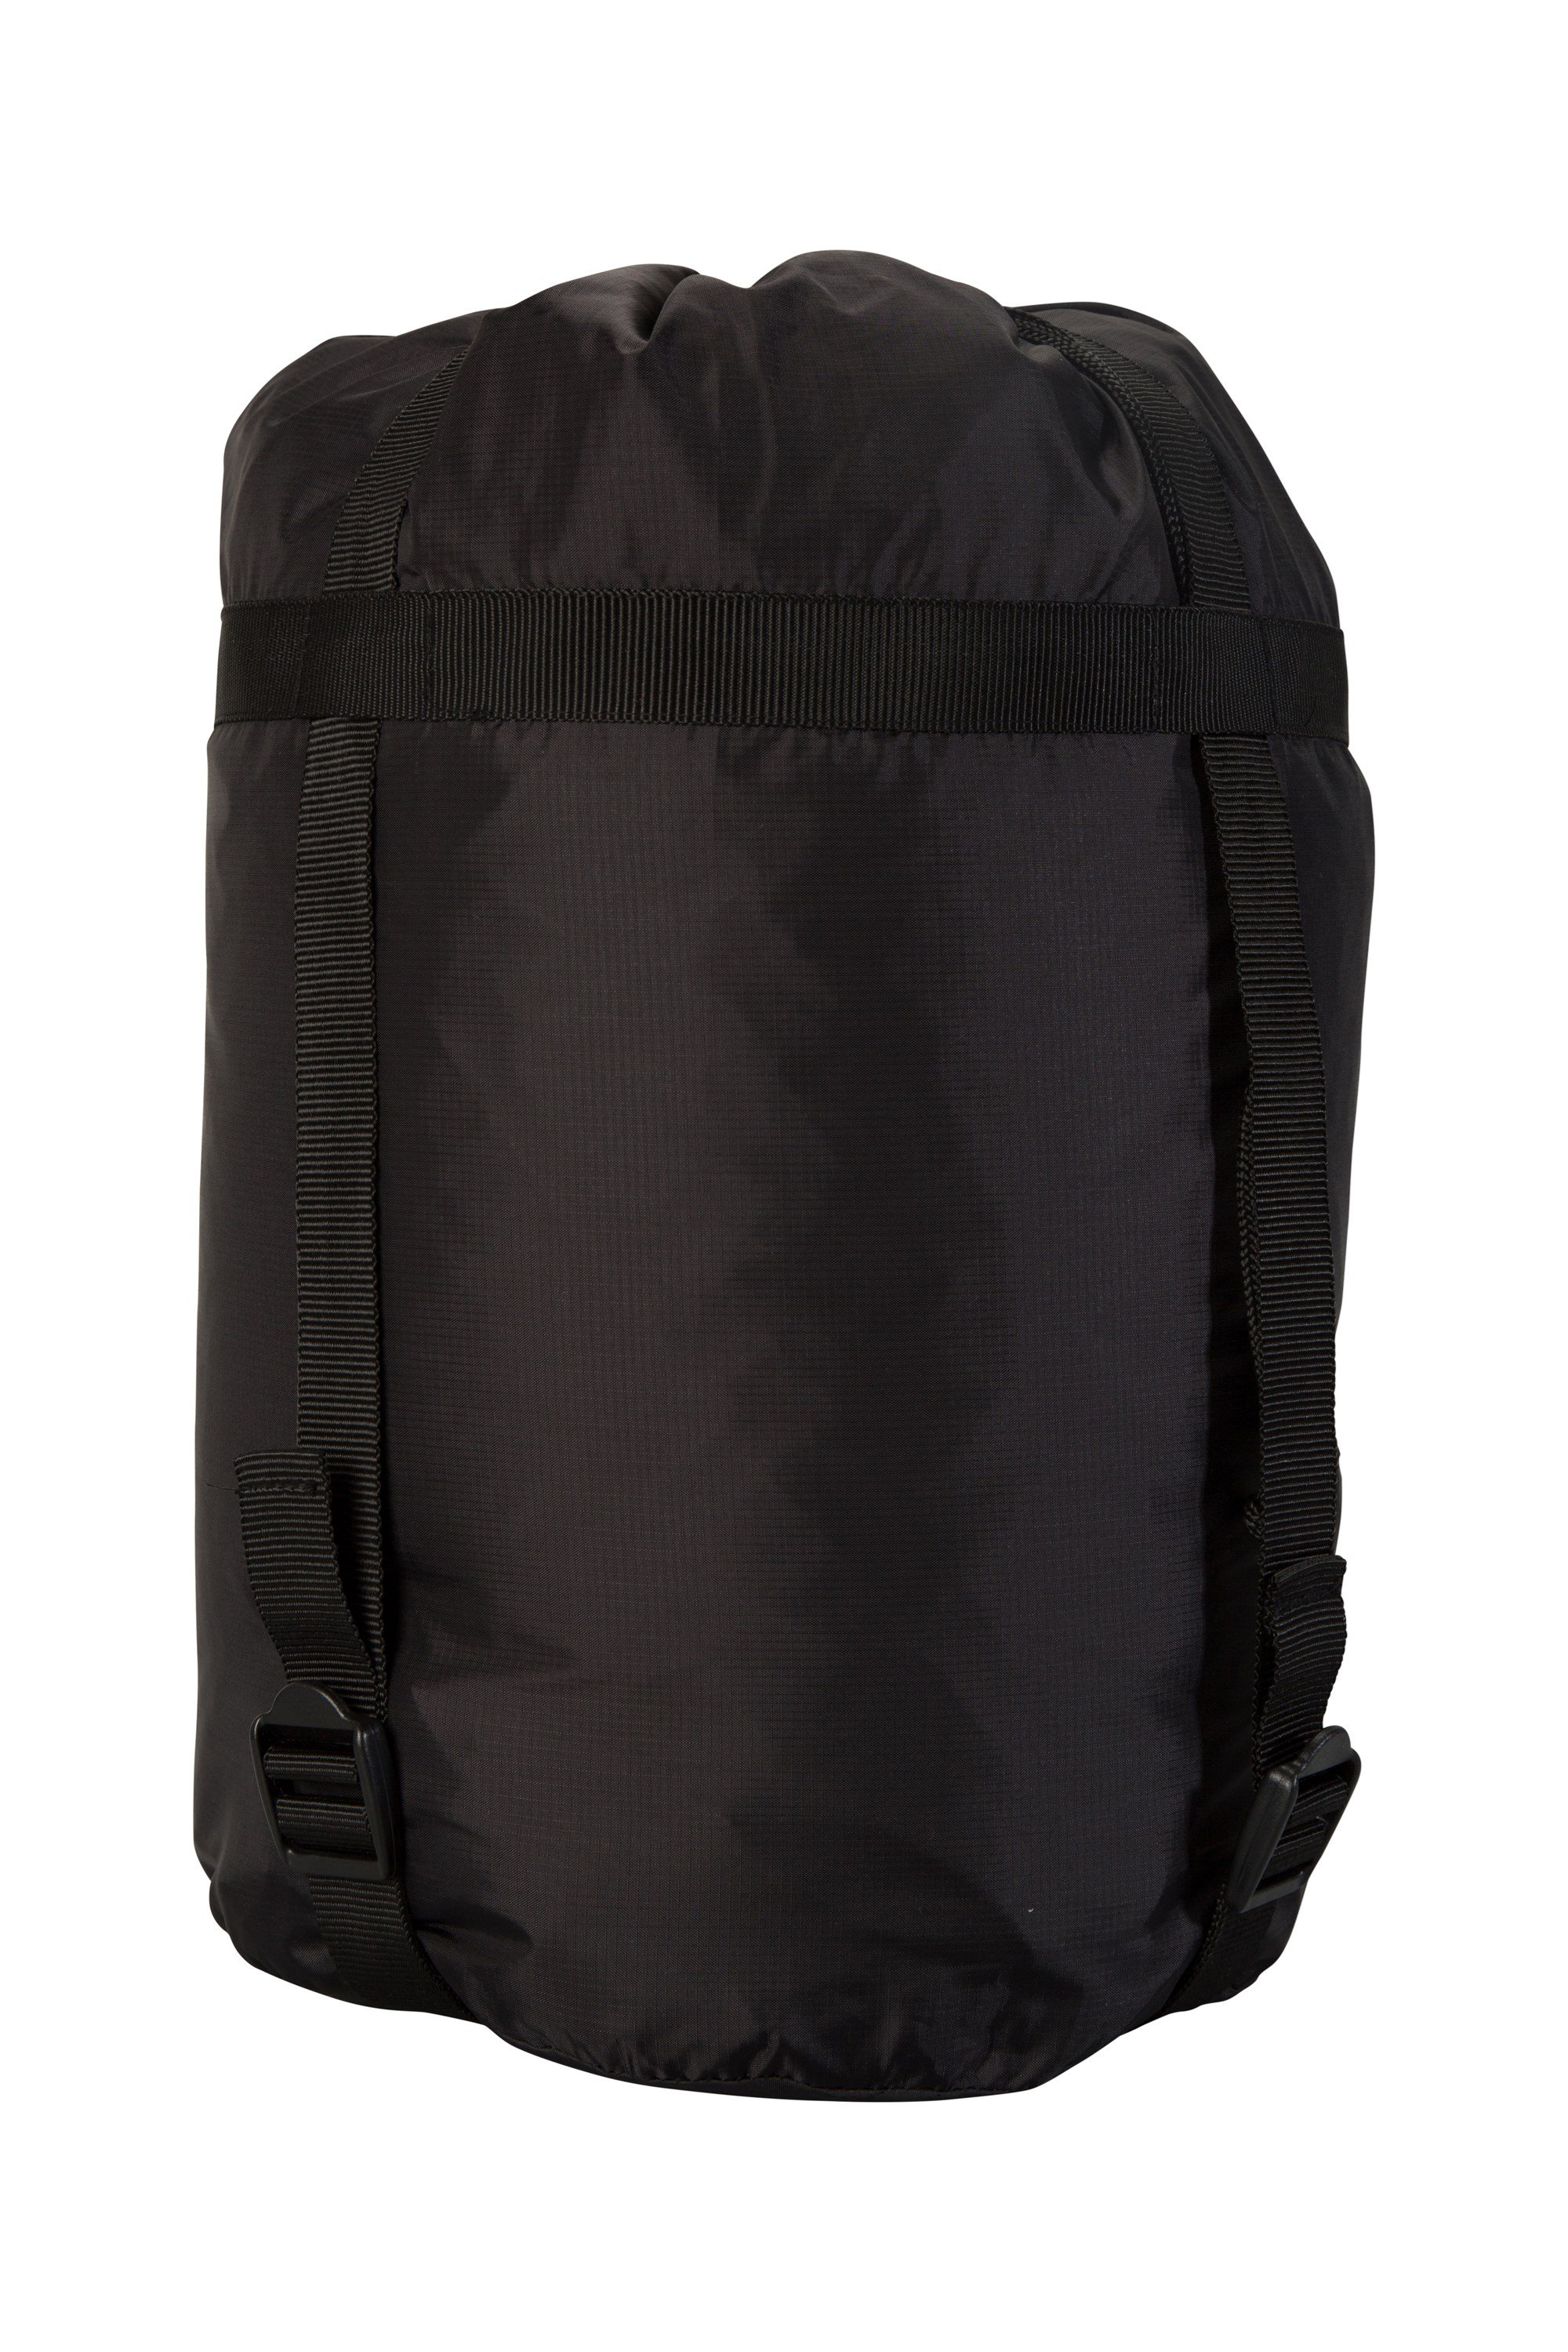 Exped Waterproof Telecompression Bag 15l Drybag - Other - Camping - Outdoor  - All